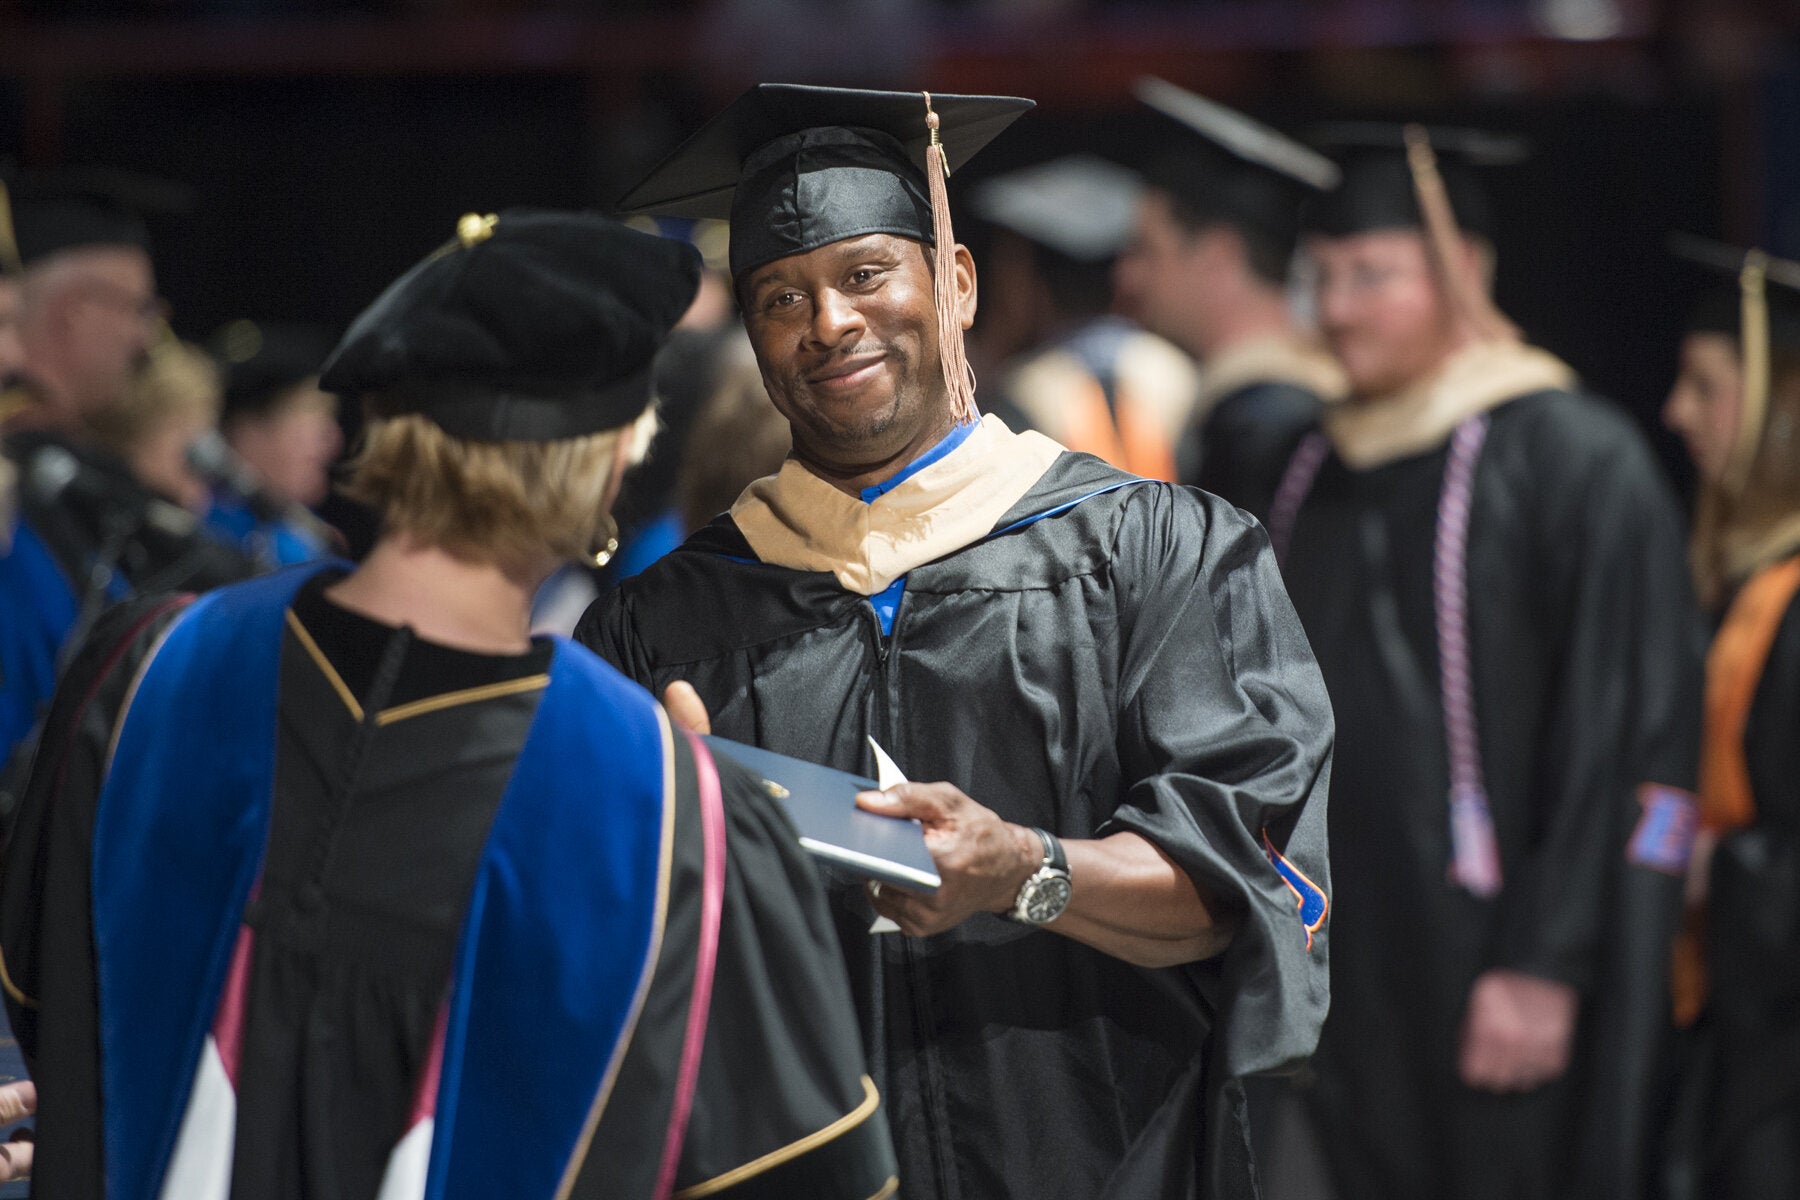 MBA student receiving diploma at commencement